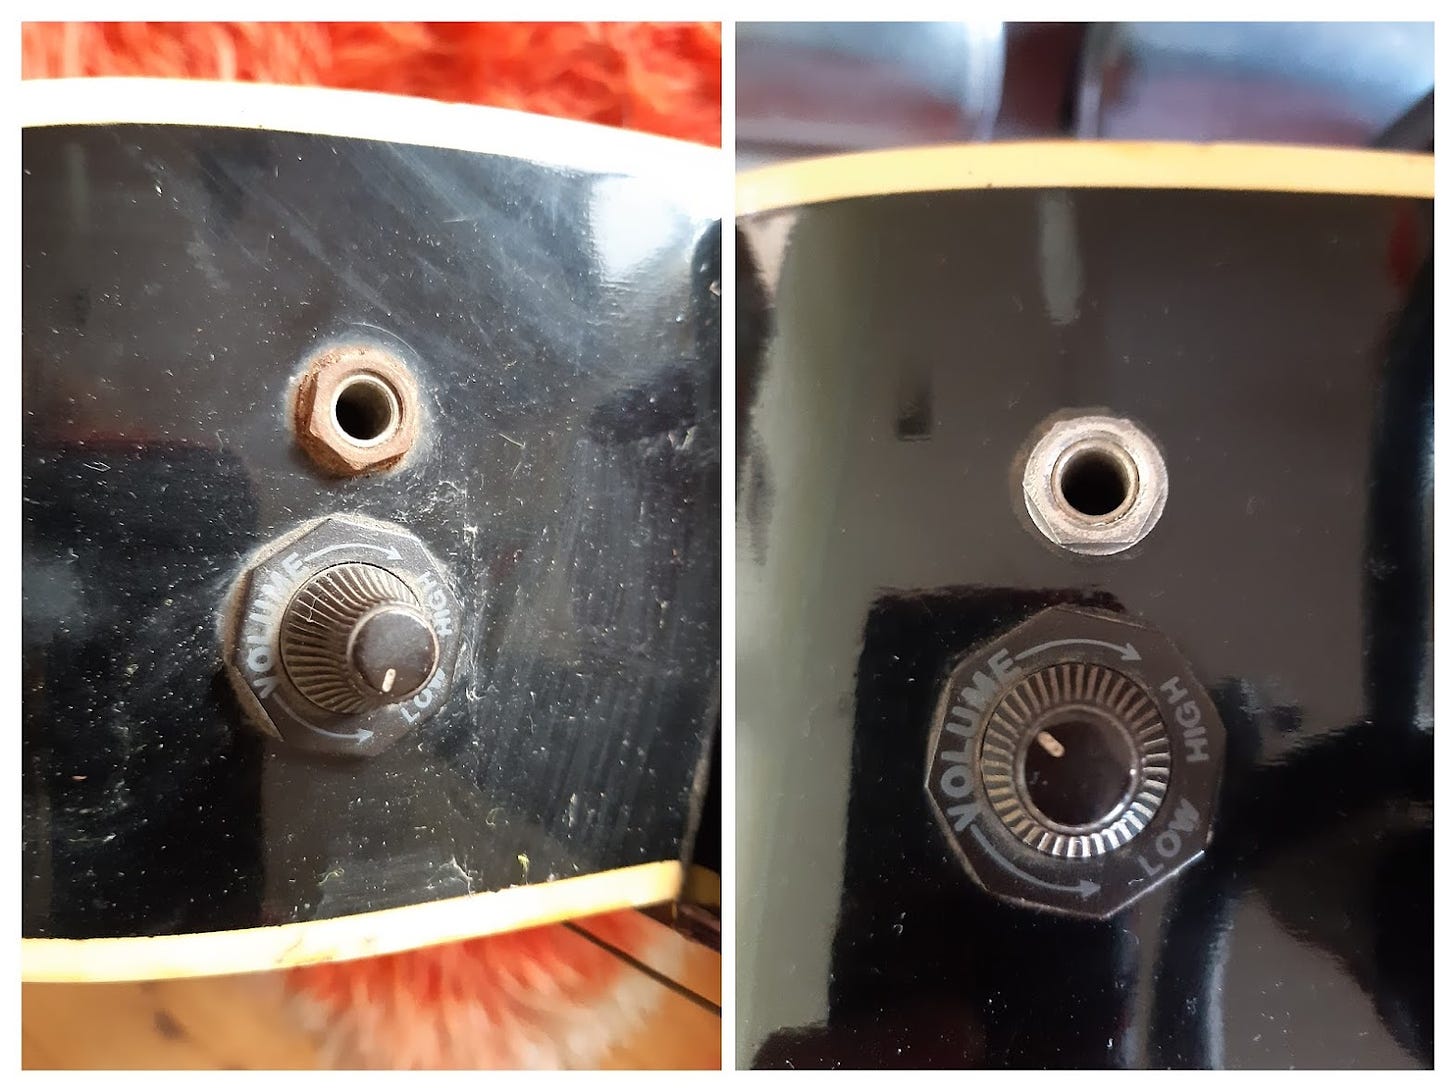 Emperador lead jack before and after cleaning